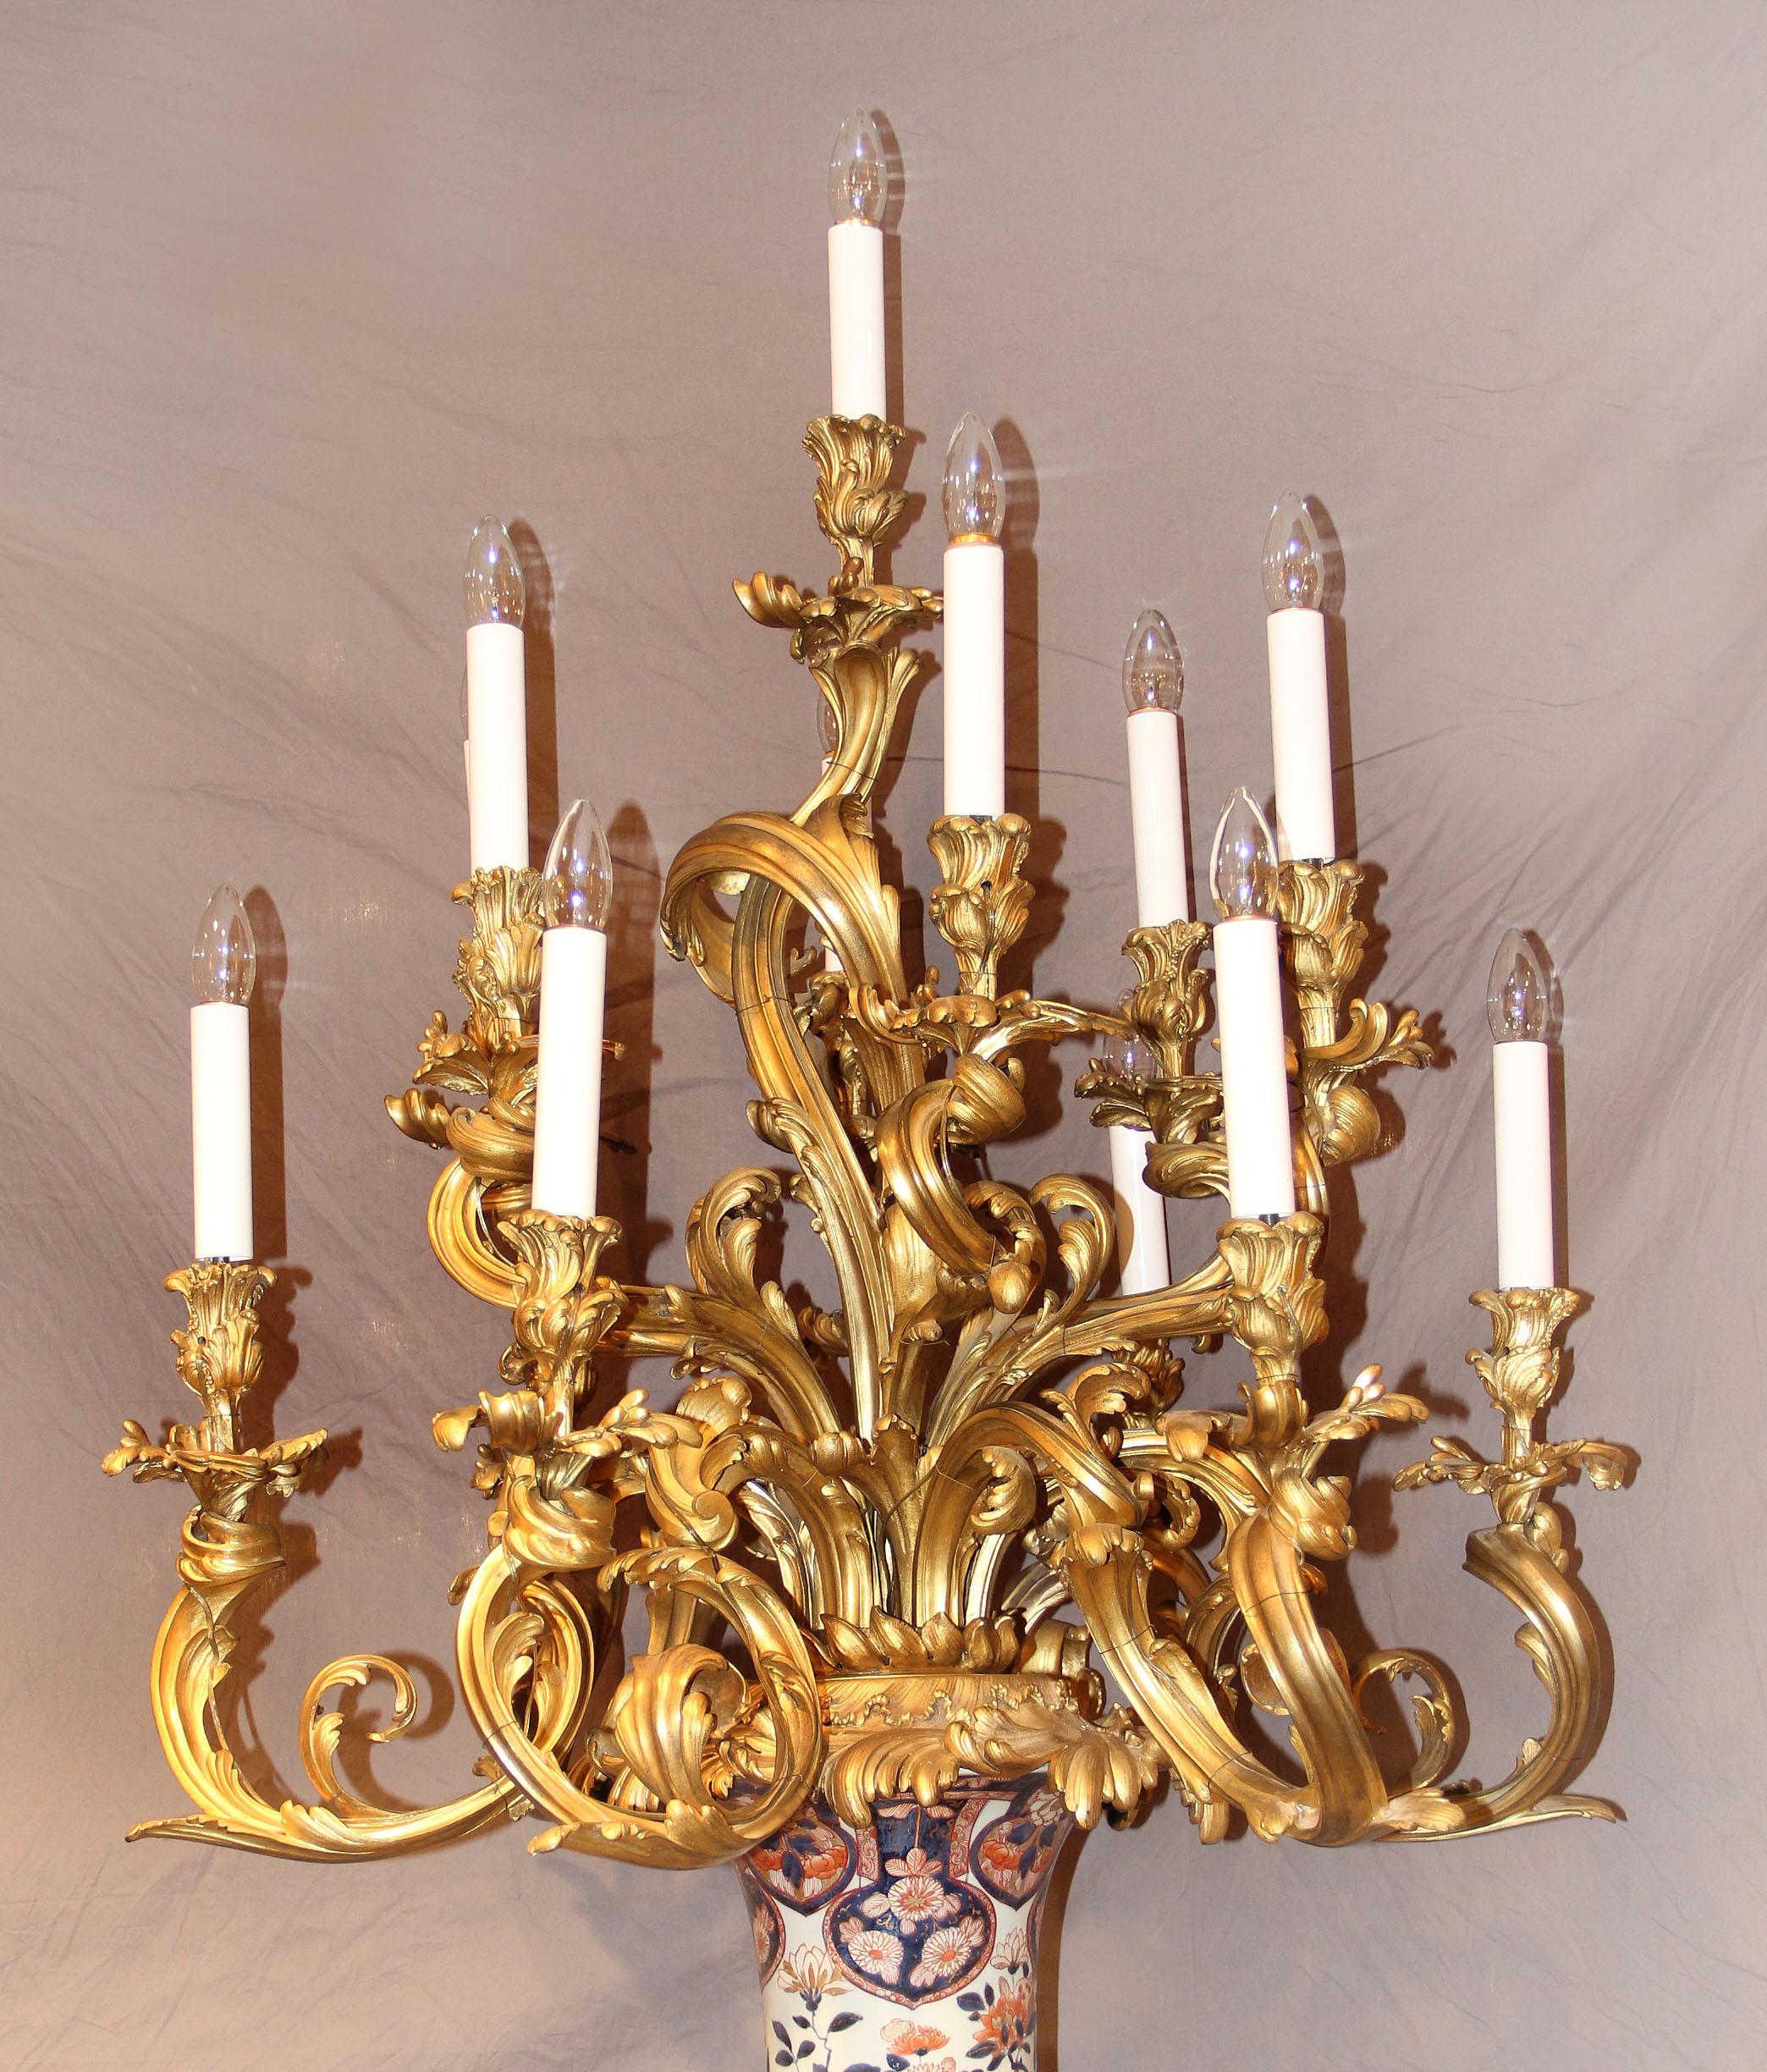 A Palatial pair of mid-19th century gilt bronze mounted Napoleon III Imari porcelain thirteen light torchères.

Each massive torchère with scrolled acanthus handles below the neck, thirteen bronze scrolled candle arms. Standing on wonderful